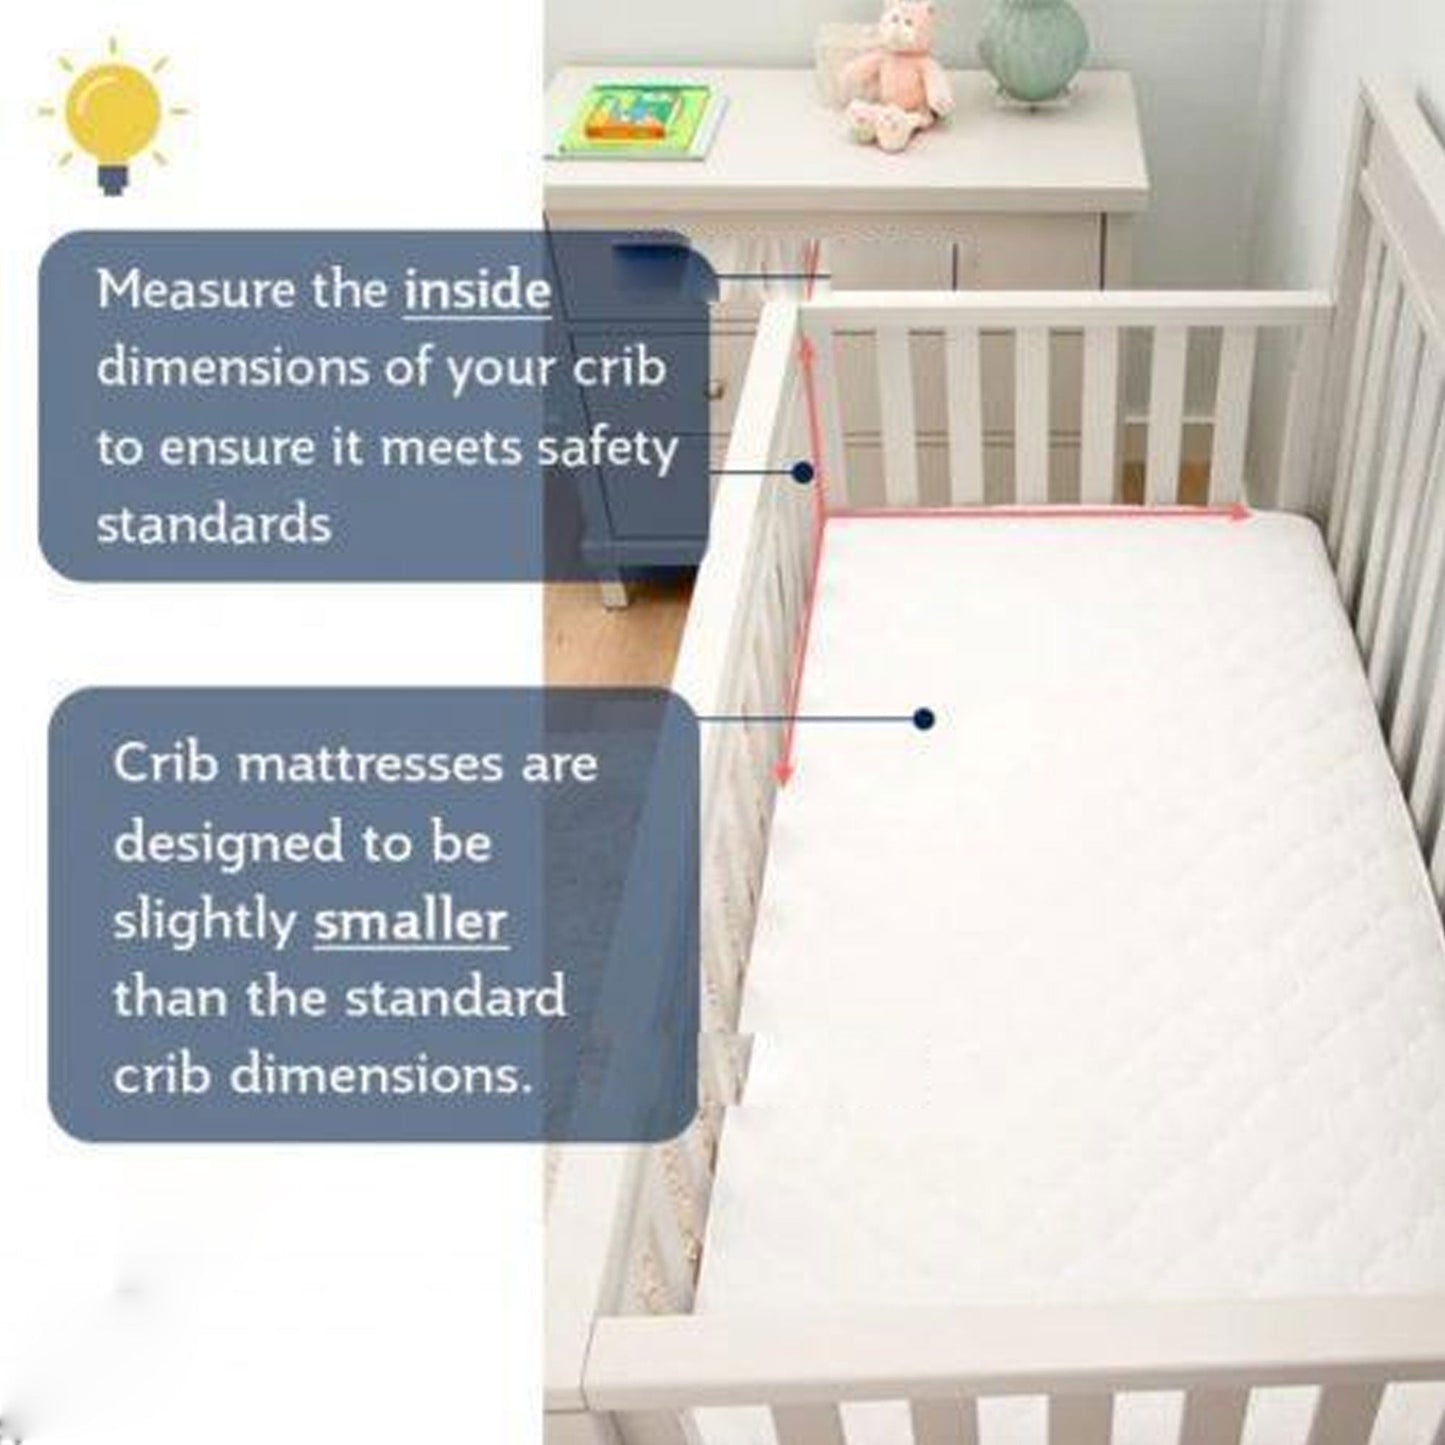 89 X 36 X 4 CM - CRIB Breathable Quilted Cot Baby Mattress - TheComfortshop.co.ukNursery Bedding0721718957263thecomfortshopTheComfortshop.co.ukCrib 89 x 3689 X 36 X 4 CM - CRIB Breathable Quilted Cot Baby Mattress - TheComfortshop.co.uk